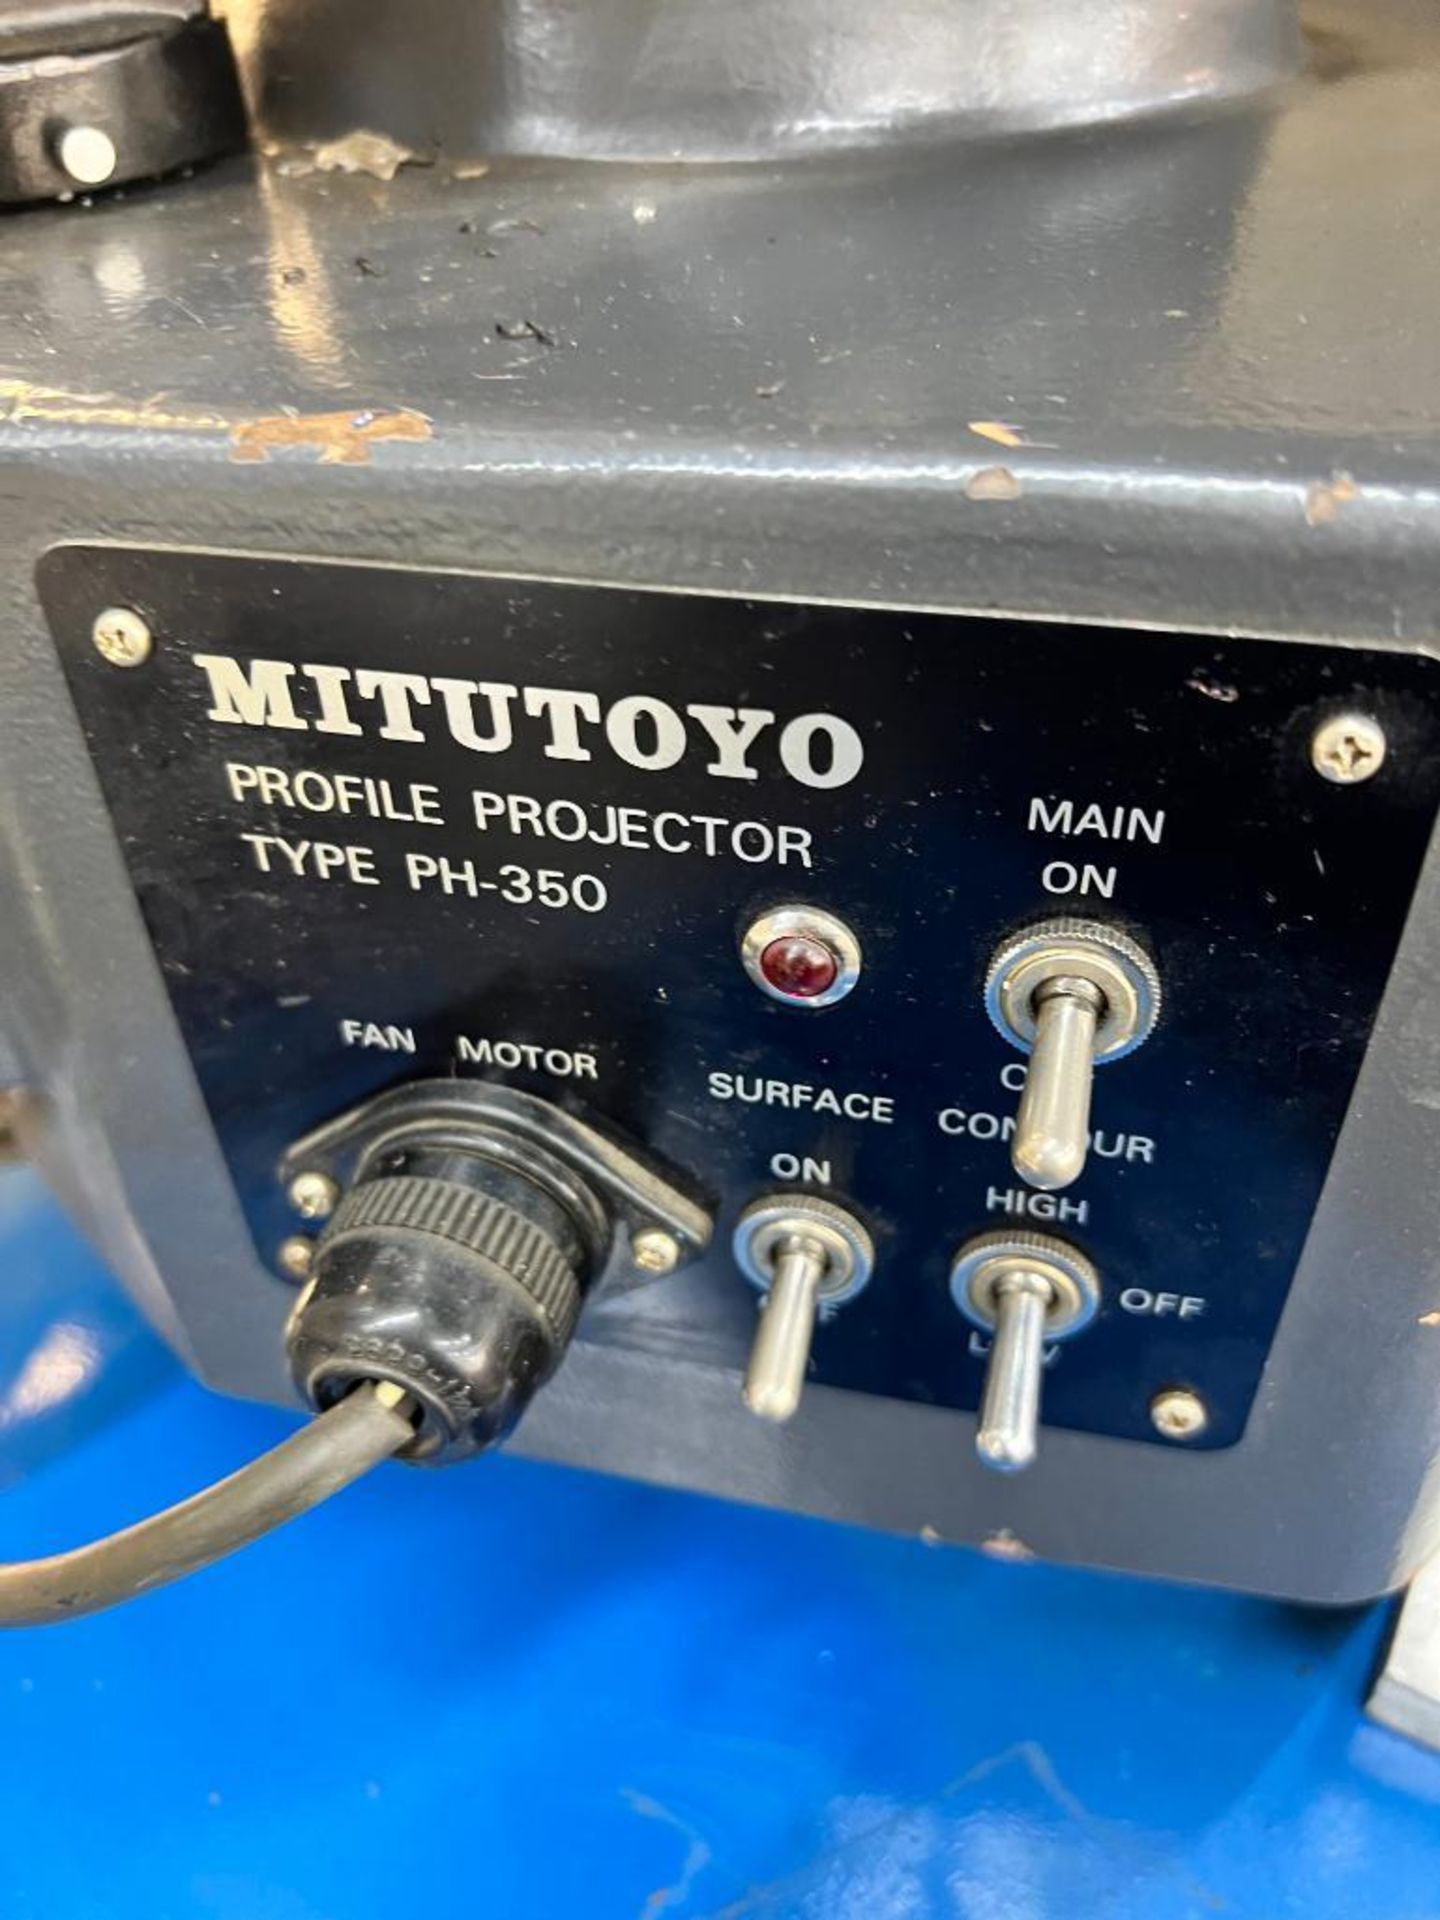 MITUTOYO PROFILE PROJECTOR, TYPE PH-350, S/N 8268, CODE NO. 172-101, W/ CART - Image 6 of 8